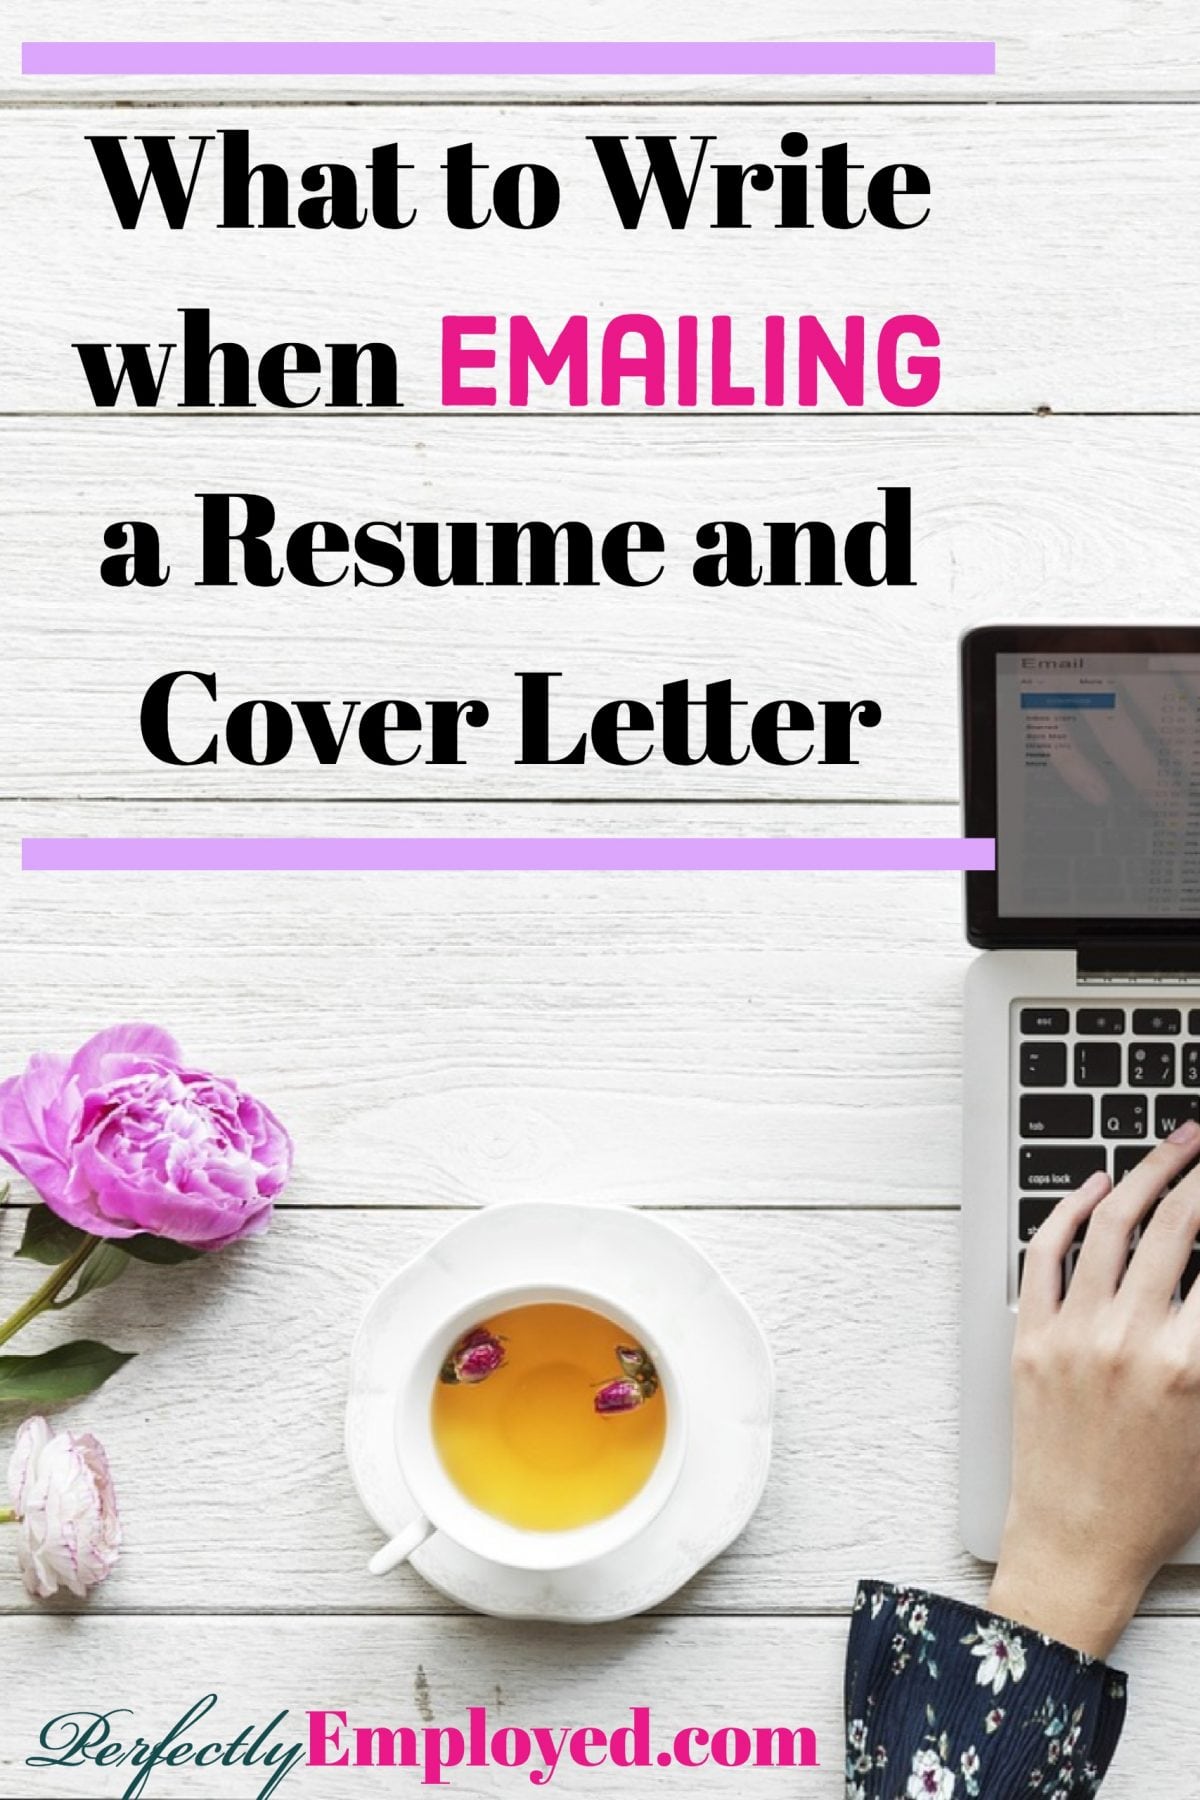 What to Write when Emailing a Resume and Cover Letter